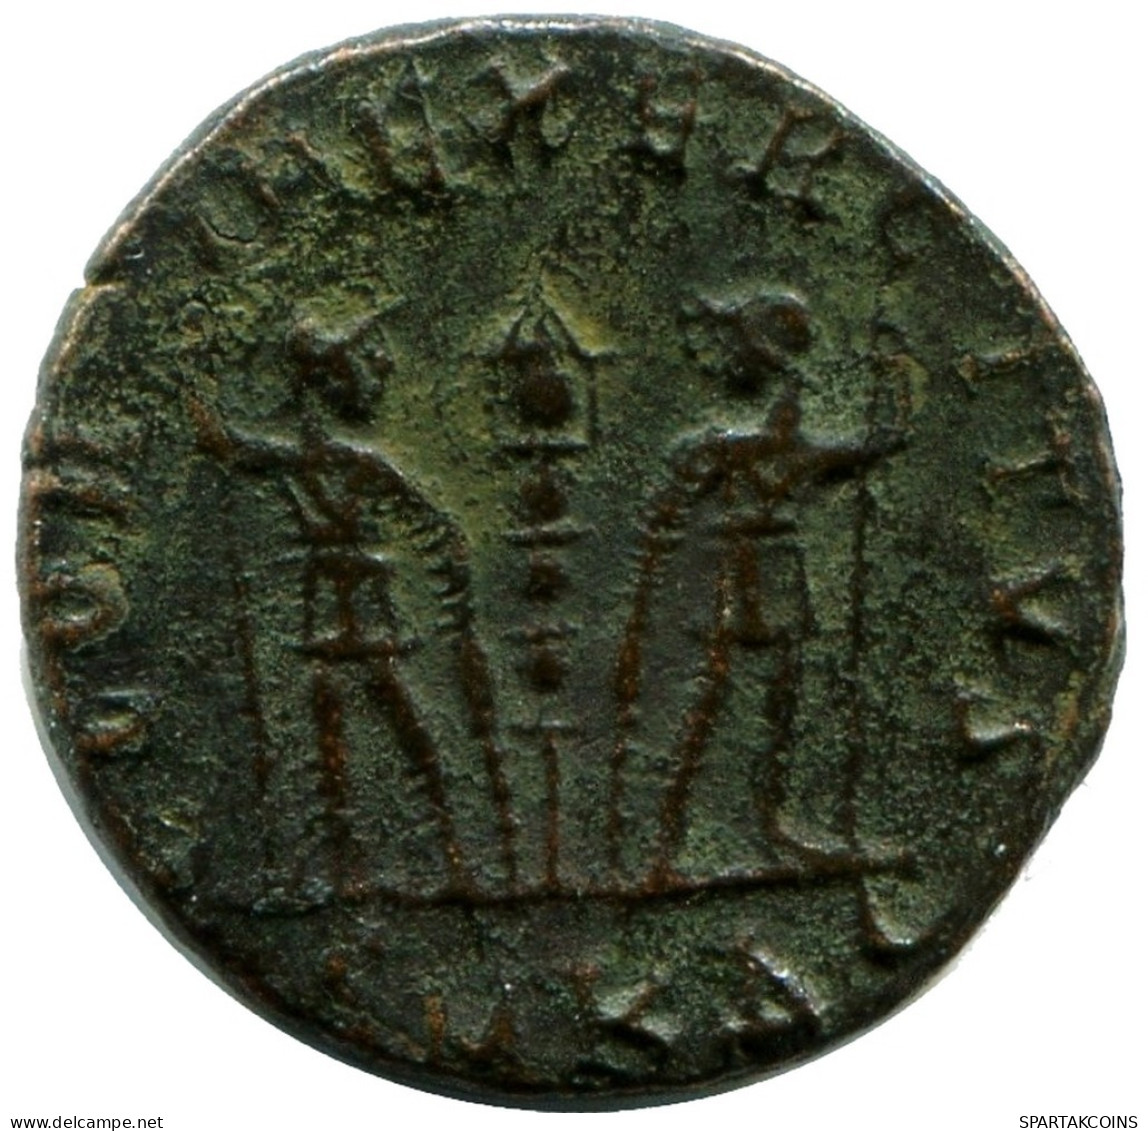 CONSTANS MINTED IN CYZICUS FOUND IN IHNASYAH HOARD EGYPT #ANC11689.14.D.A - The Christian Empire (307 AD To 363 AD)